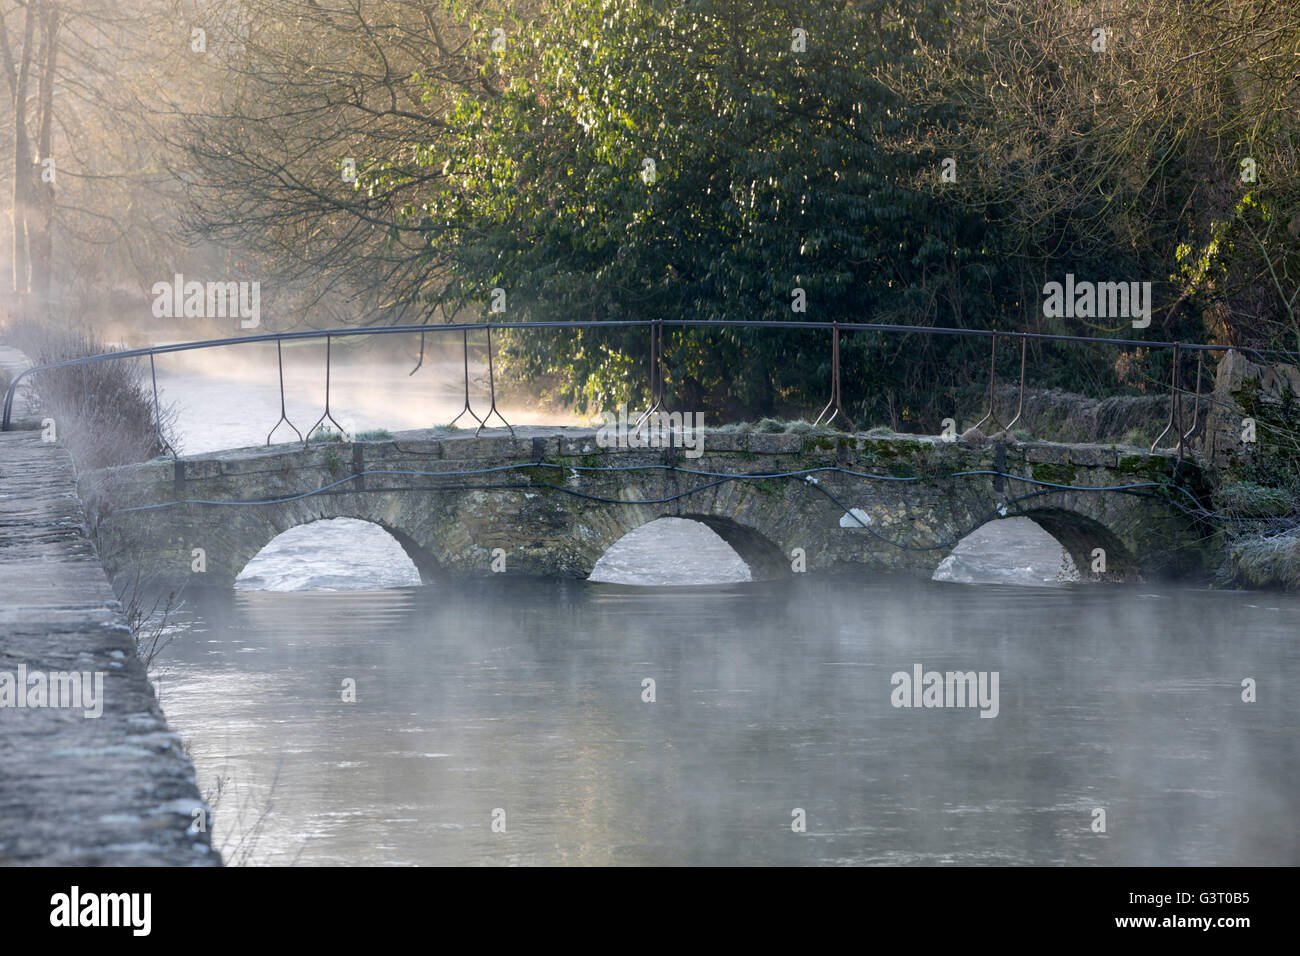 Arched footbridge over River Coln in mist, Bibury, Cotswolds, Gloucestershire, England, United Kingdom, Europe Stock Photo